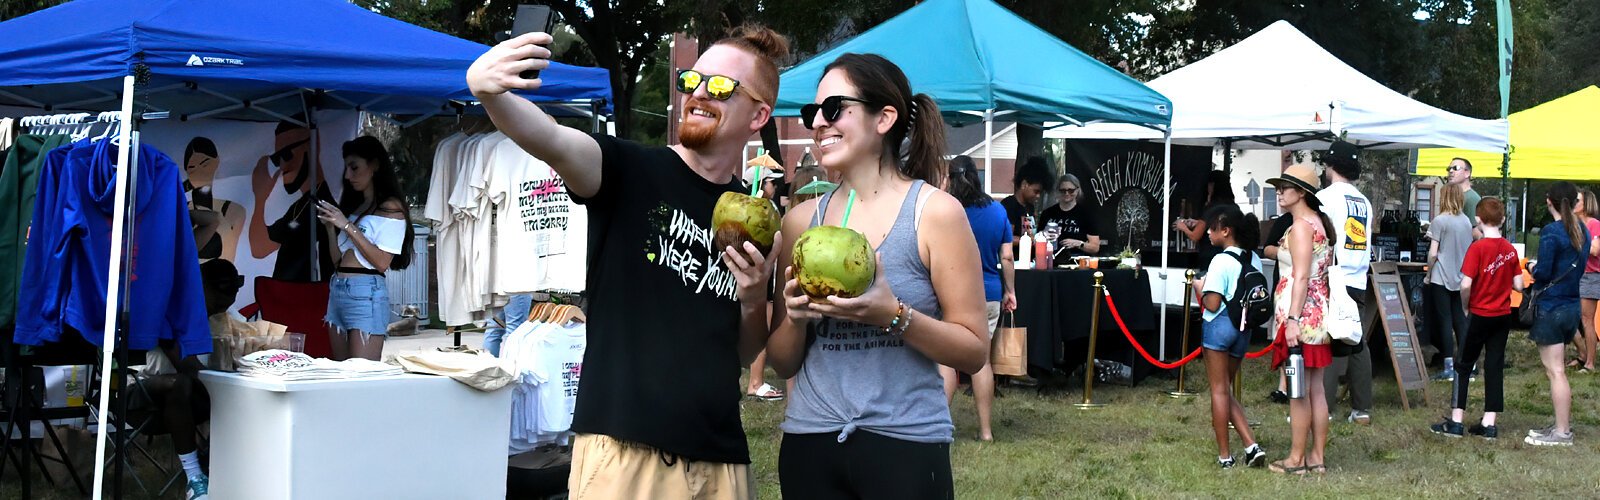 A couple with fresh coconuts in hand takes a selfie to mark the day at the 11th annual Tampa Bay VegFest, an event celebrating all things healthy, compassionate and environmentally sustainable.